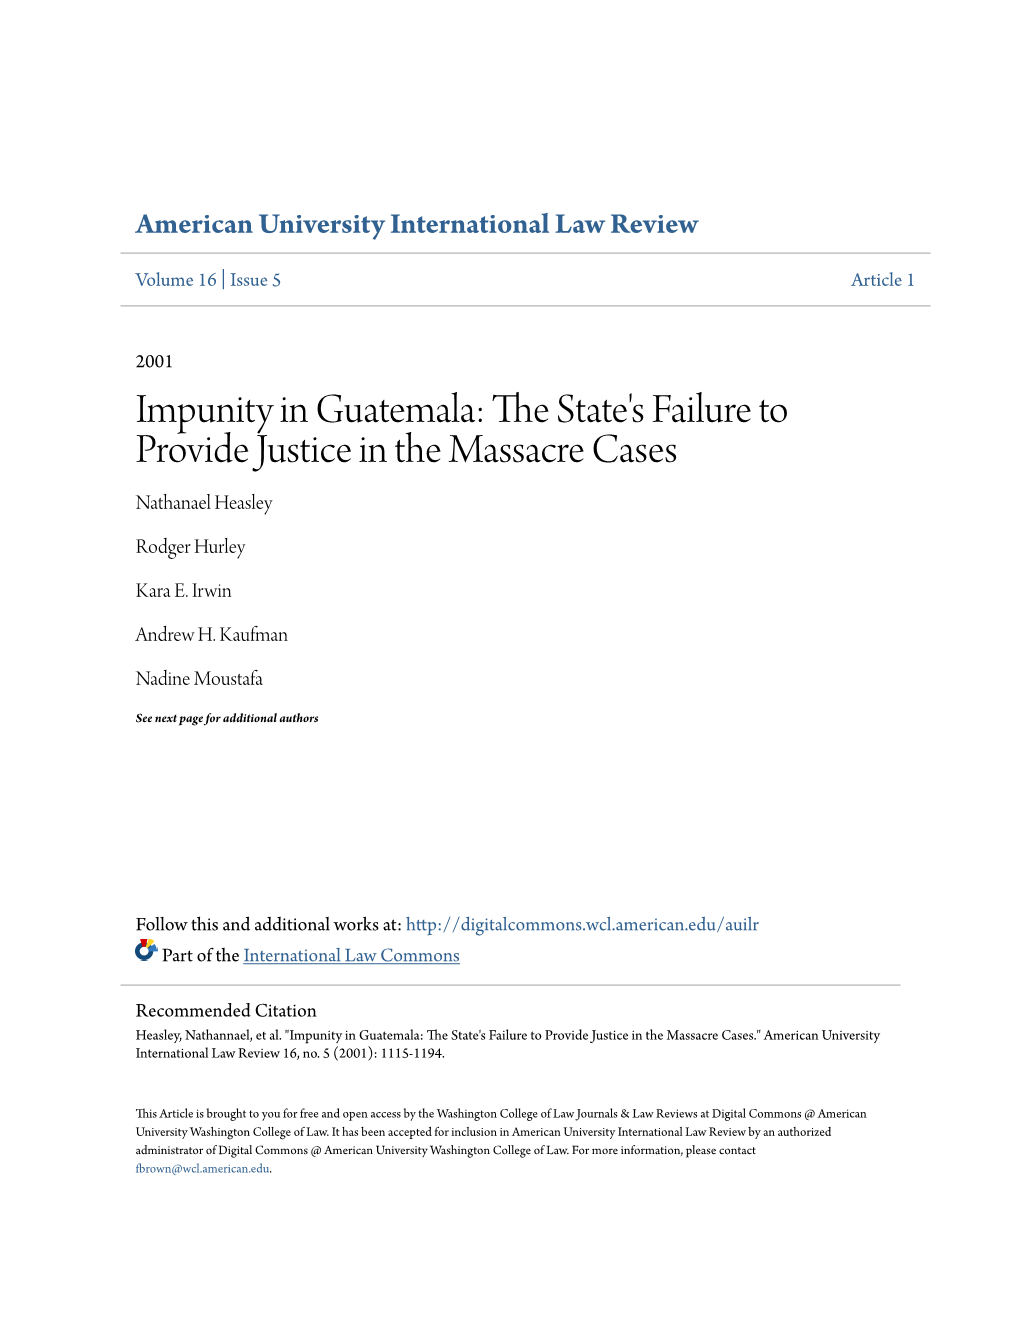 Impunity in Guatemala: the Ts Ate's Failure to Provide Justice in the Massacre Cases Nathanael Heasley